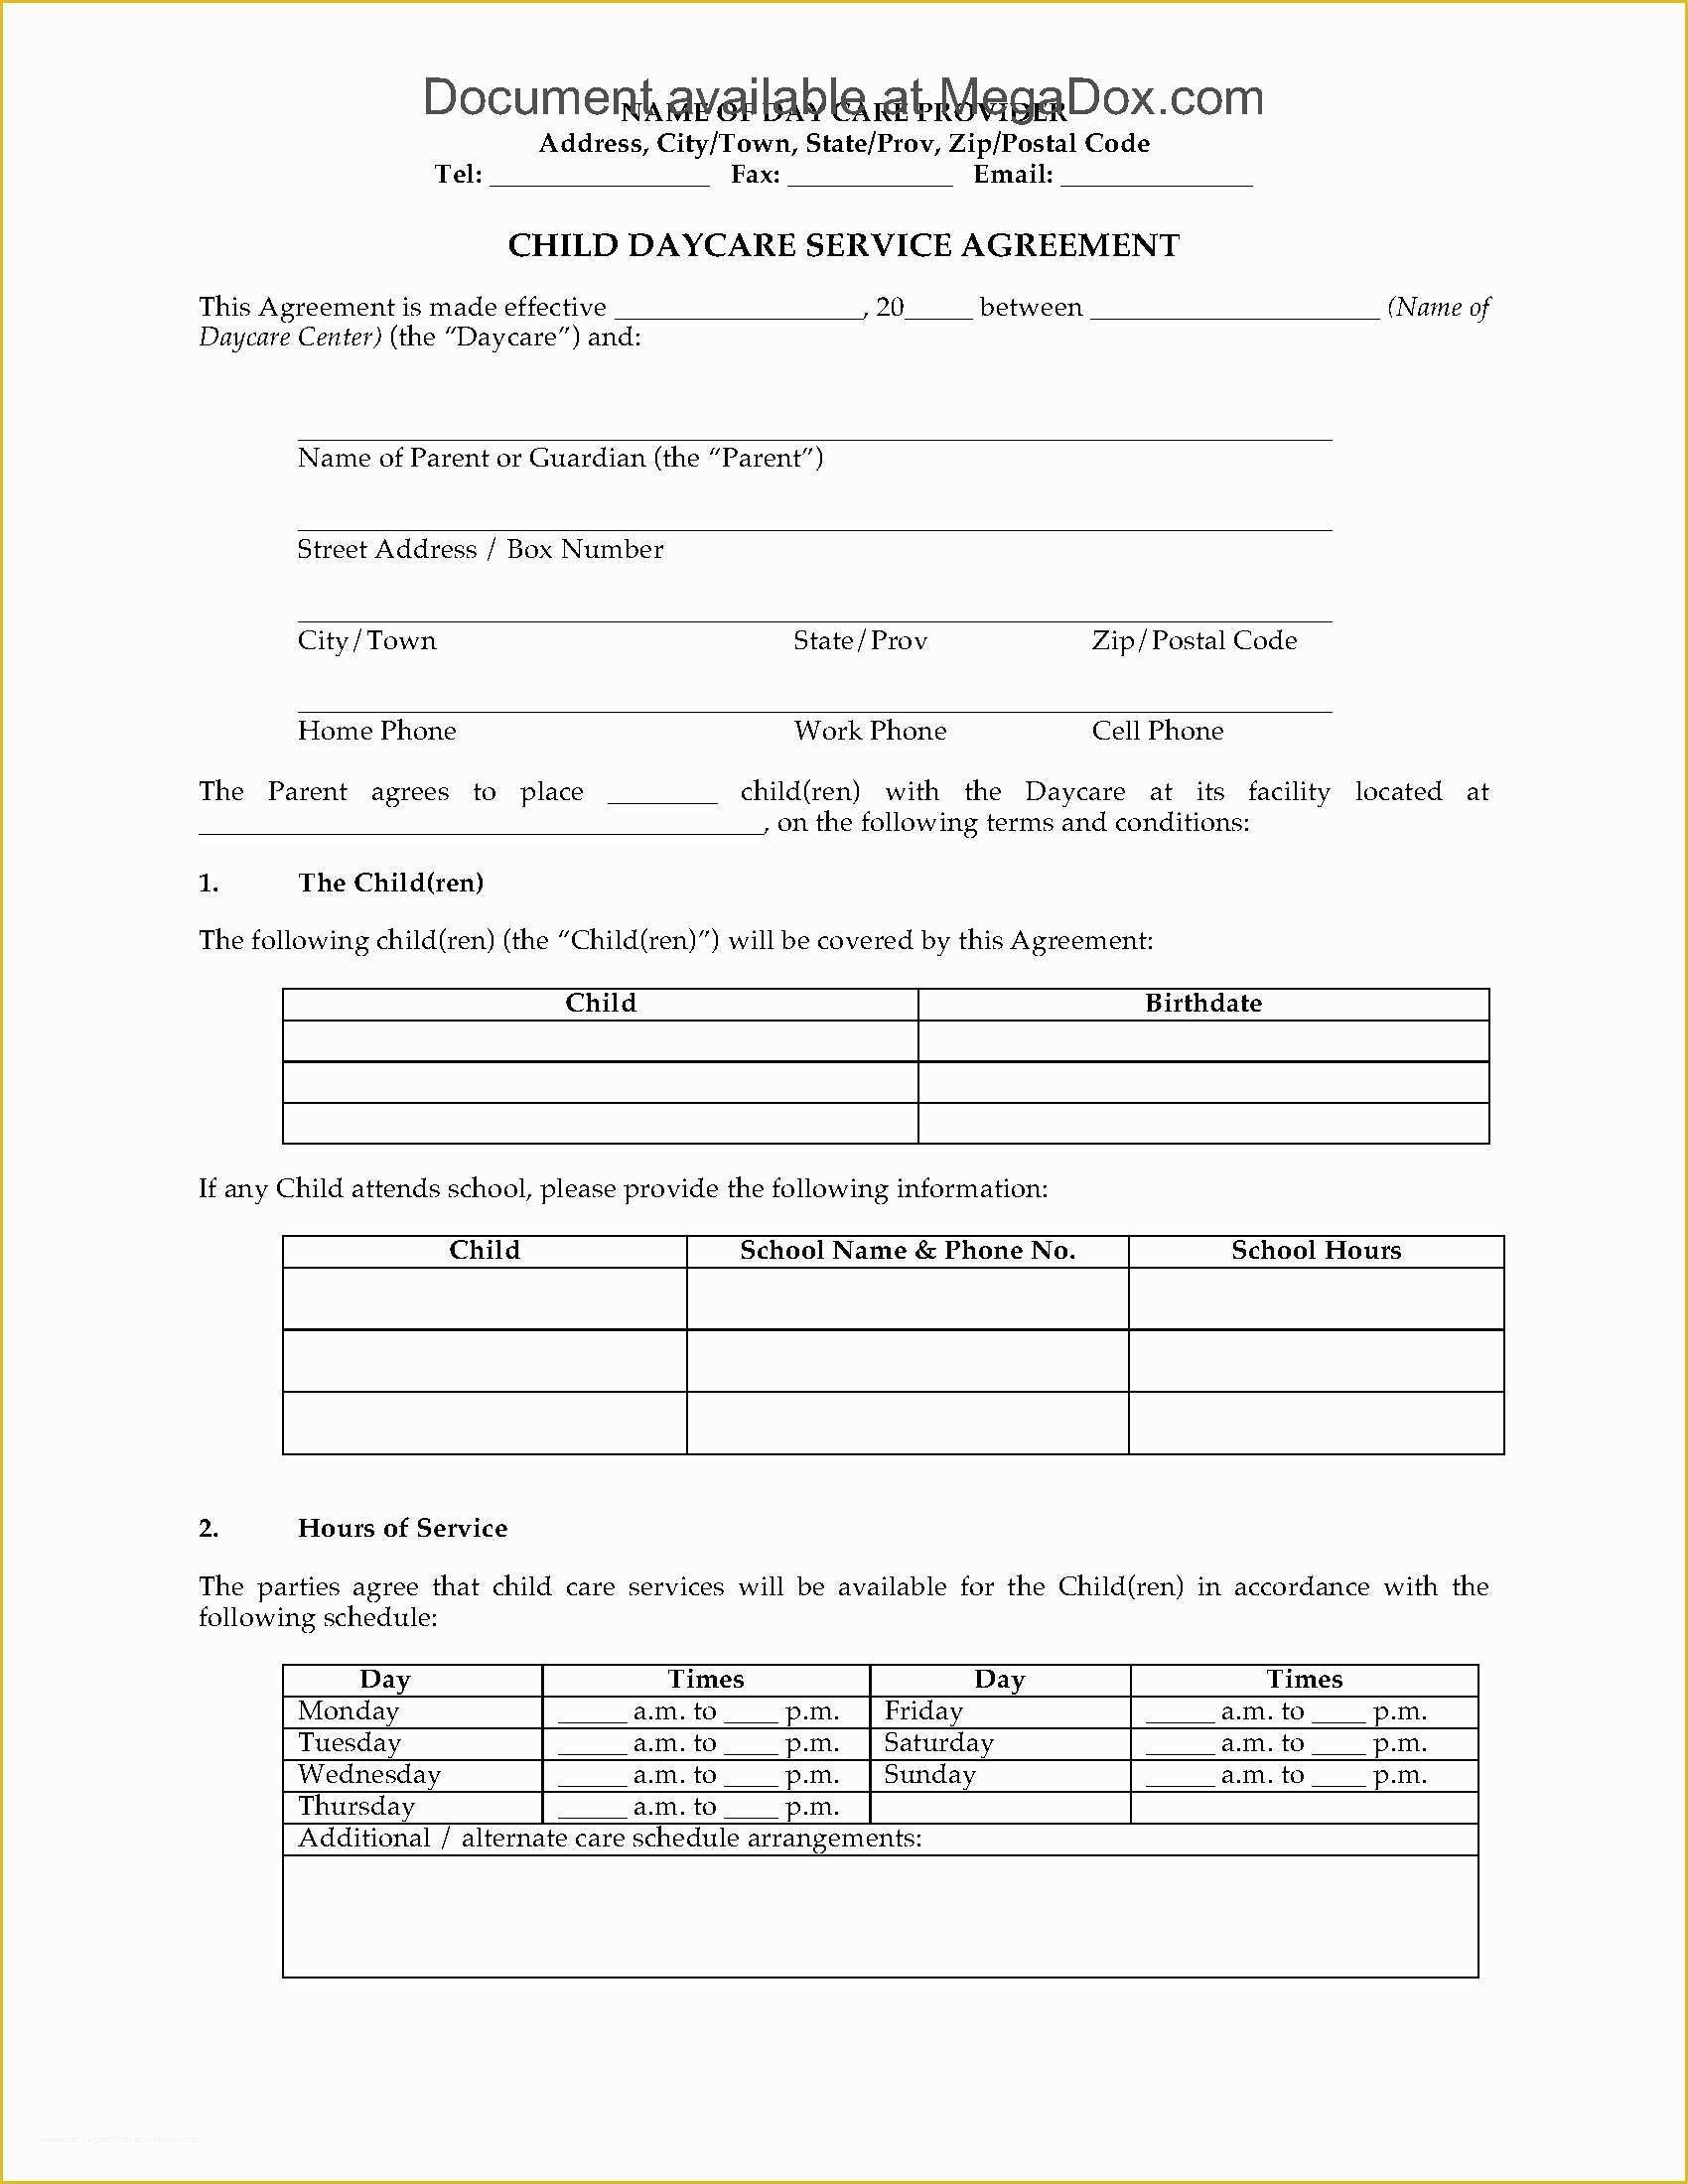 Child Care Contract Template Free Of Child Daycare Service Agreement